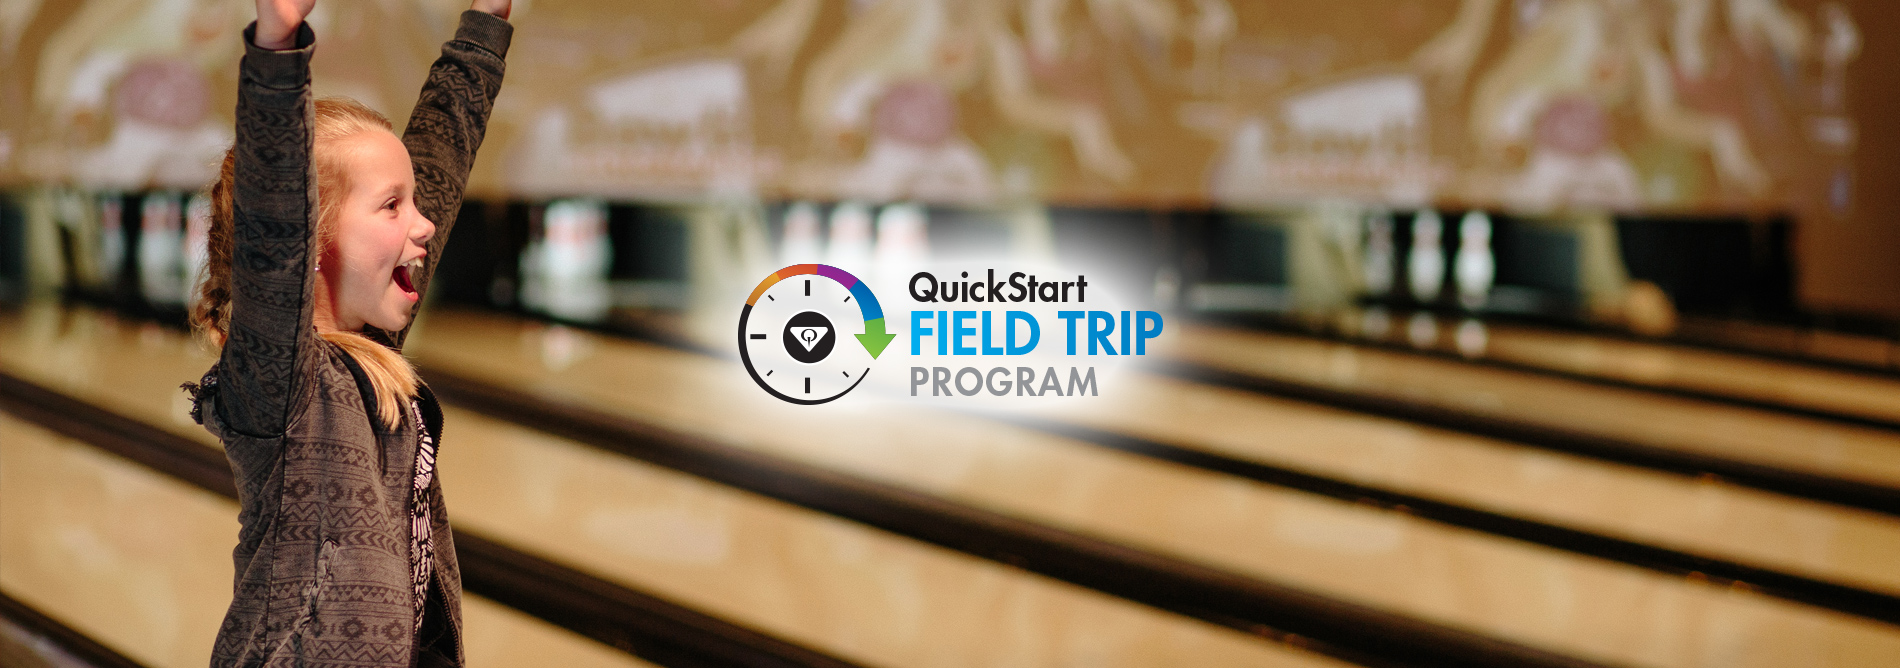 QubicaAMF-bowling-Field-Trips-Youth-Groups-QuickStart-banner.jpg